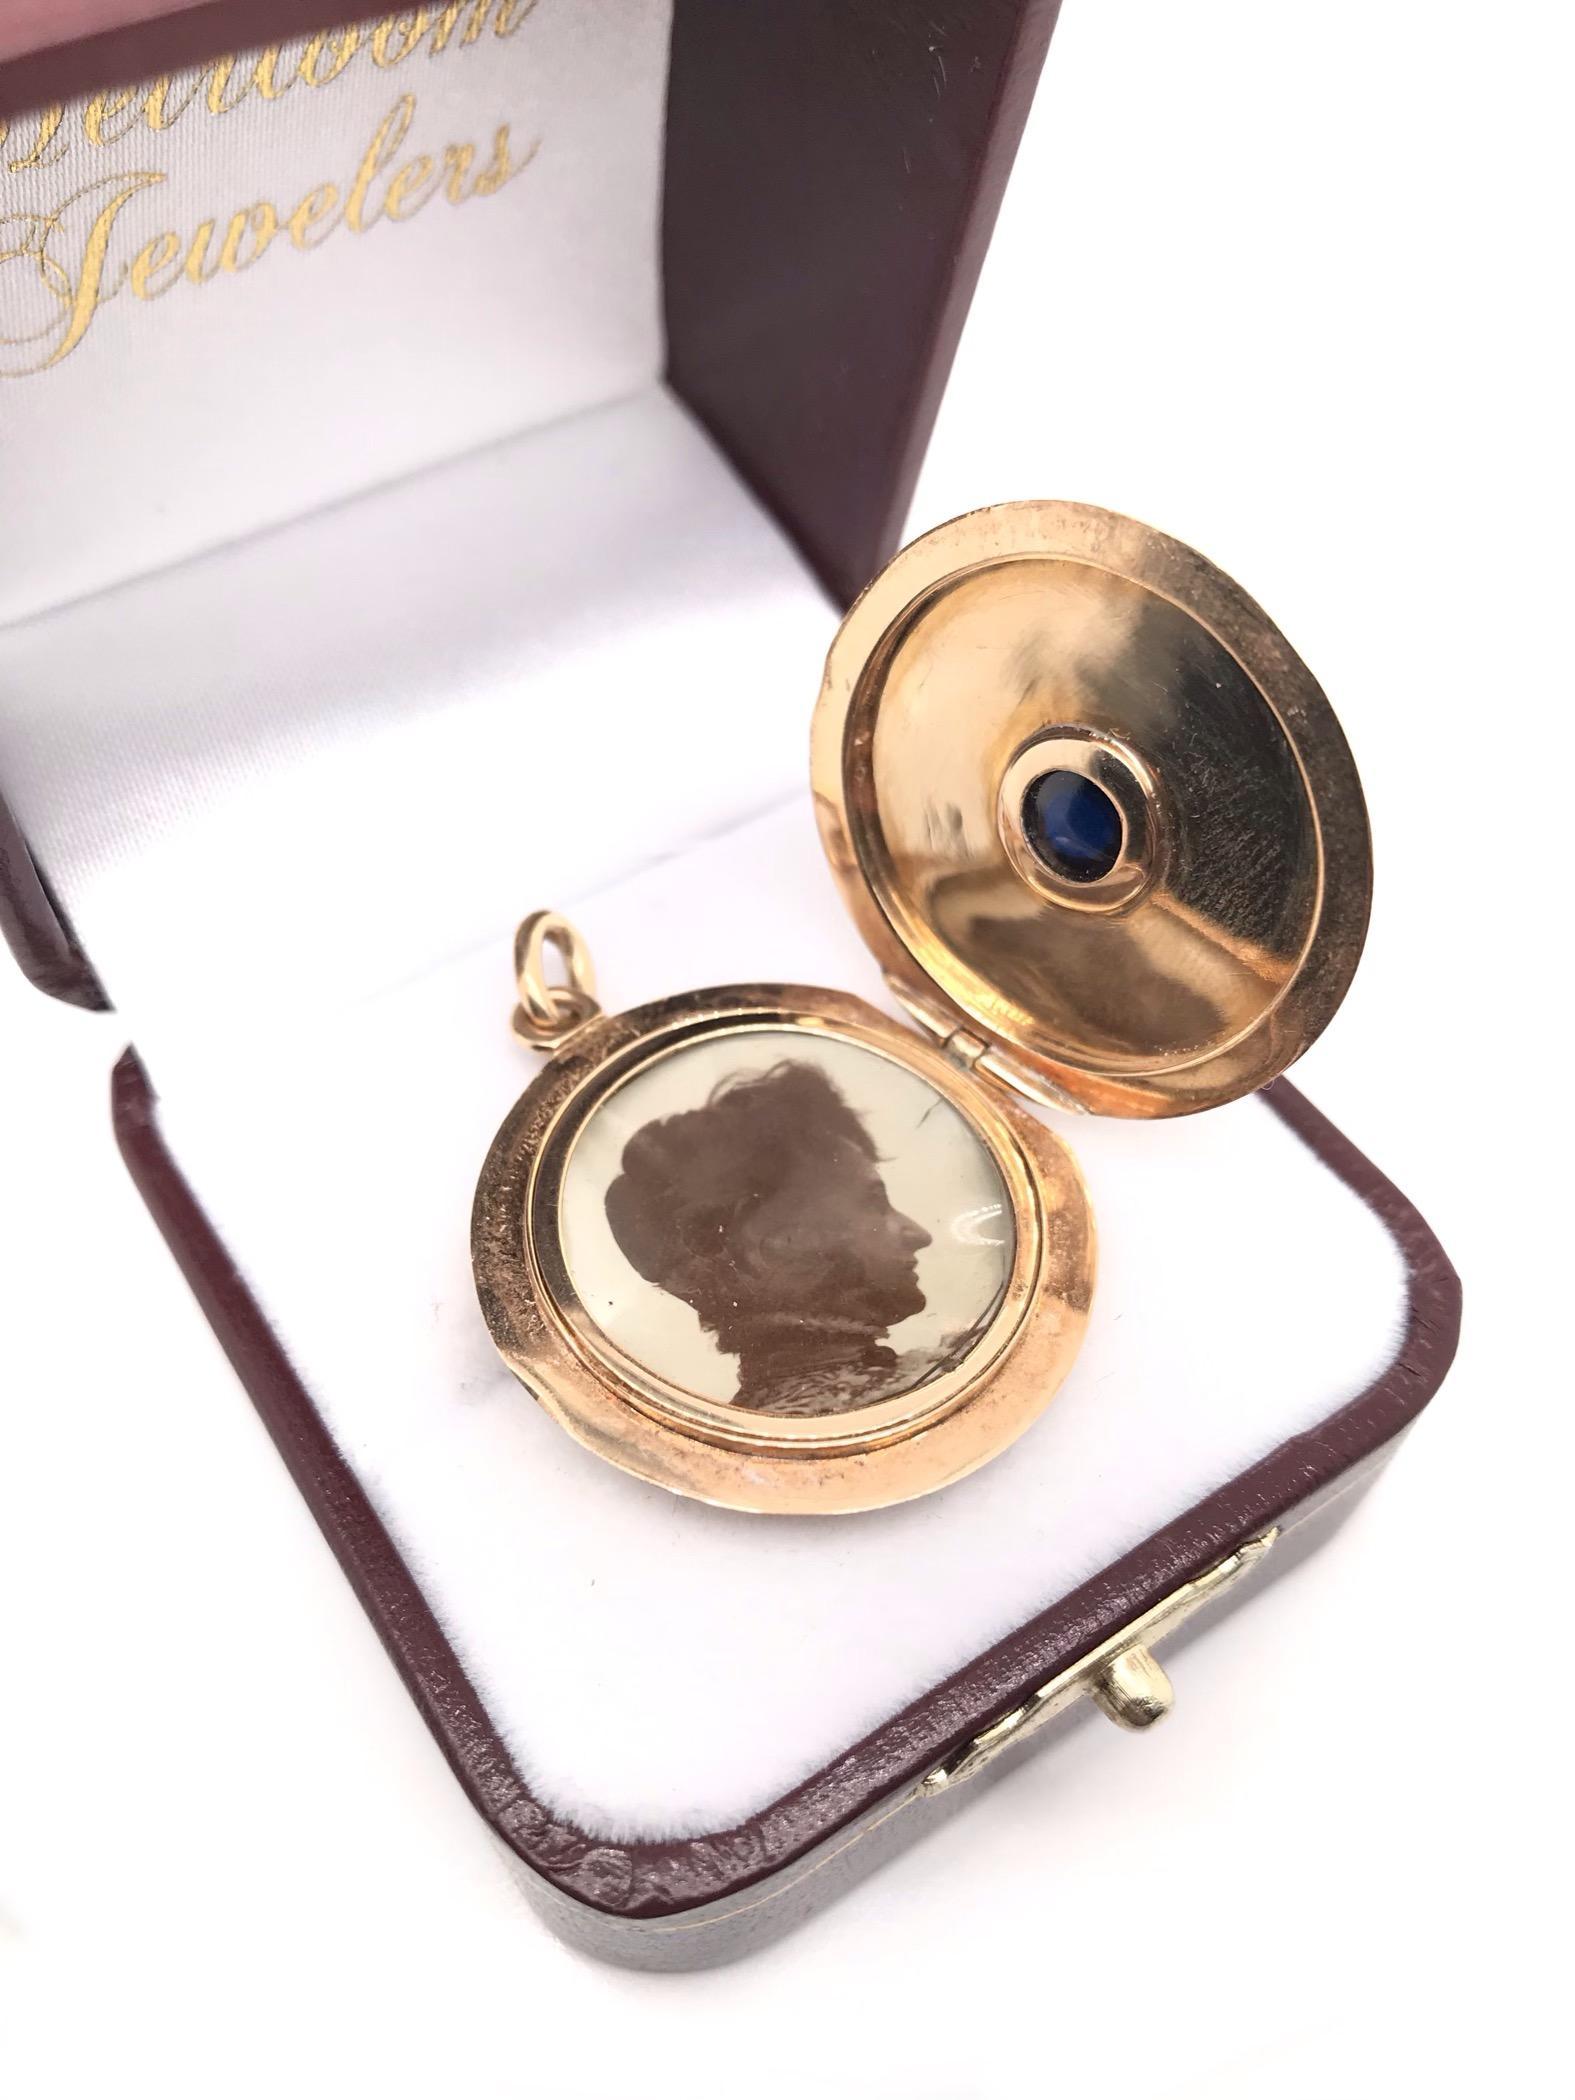 Cabochon Antique Edwardian 18k Gold Locket With Sapphire For Sale